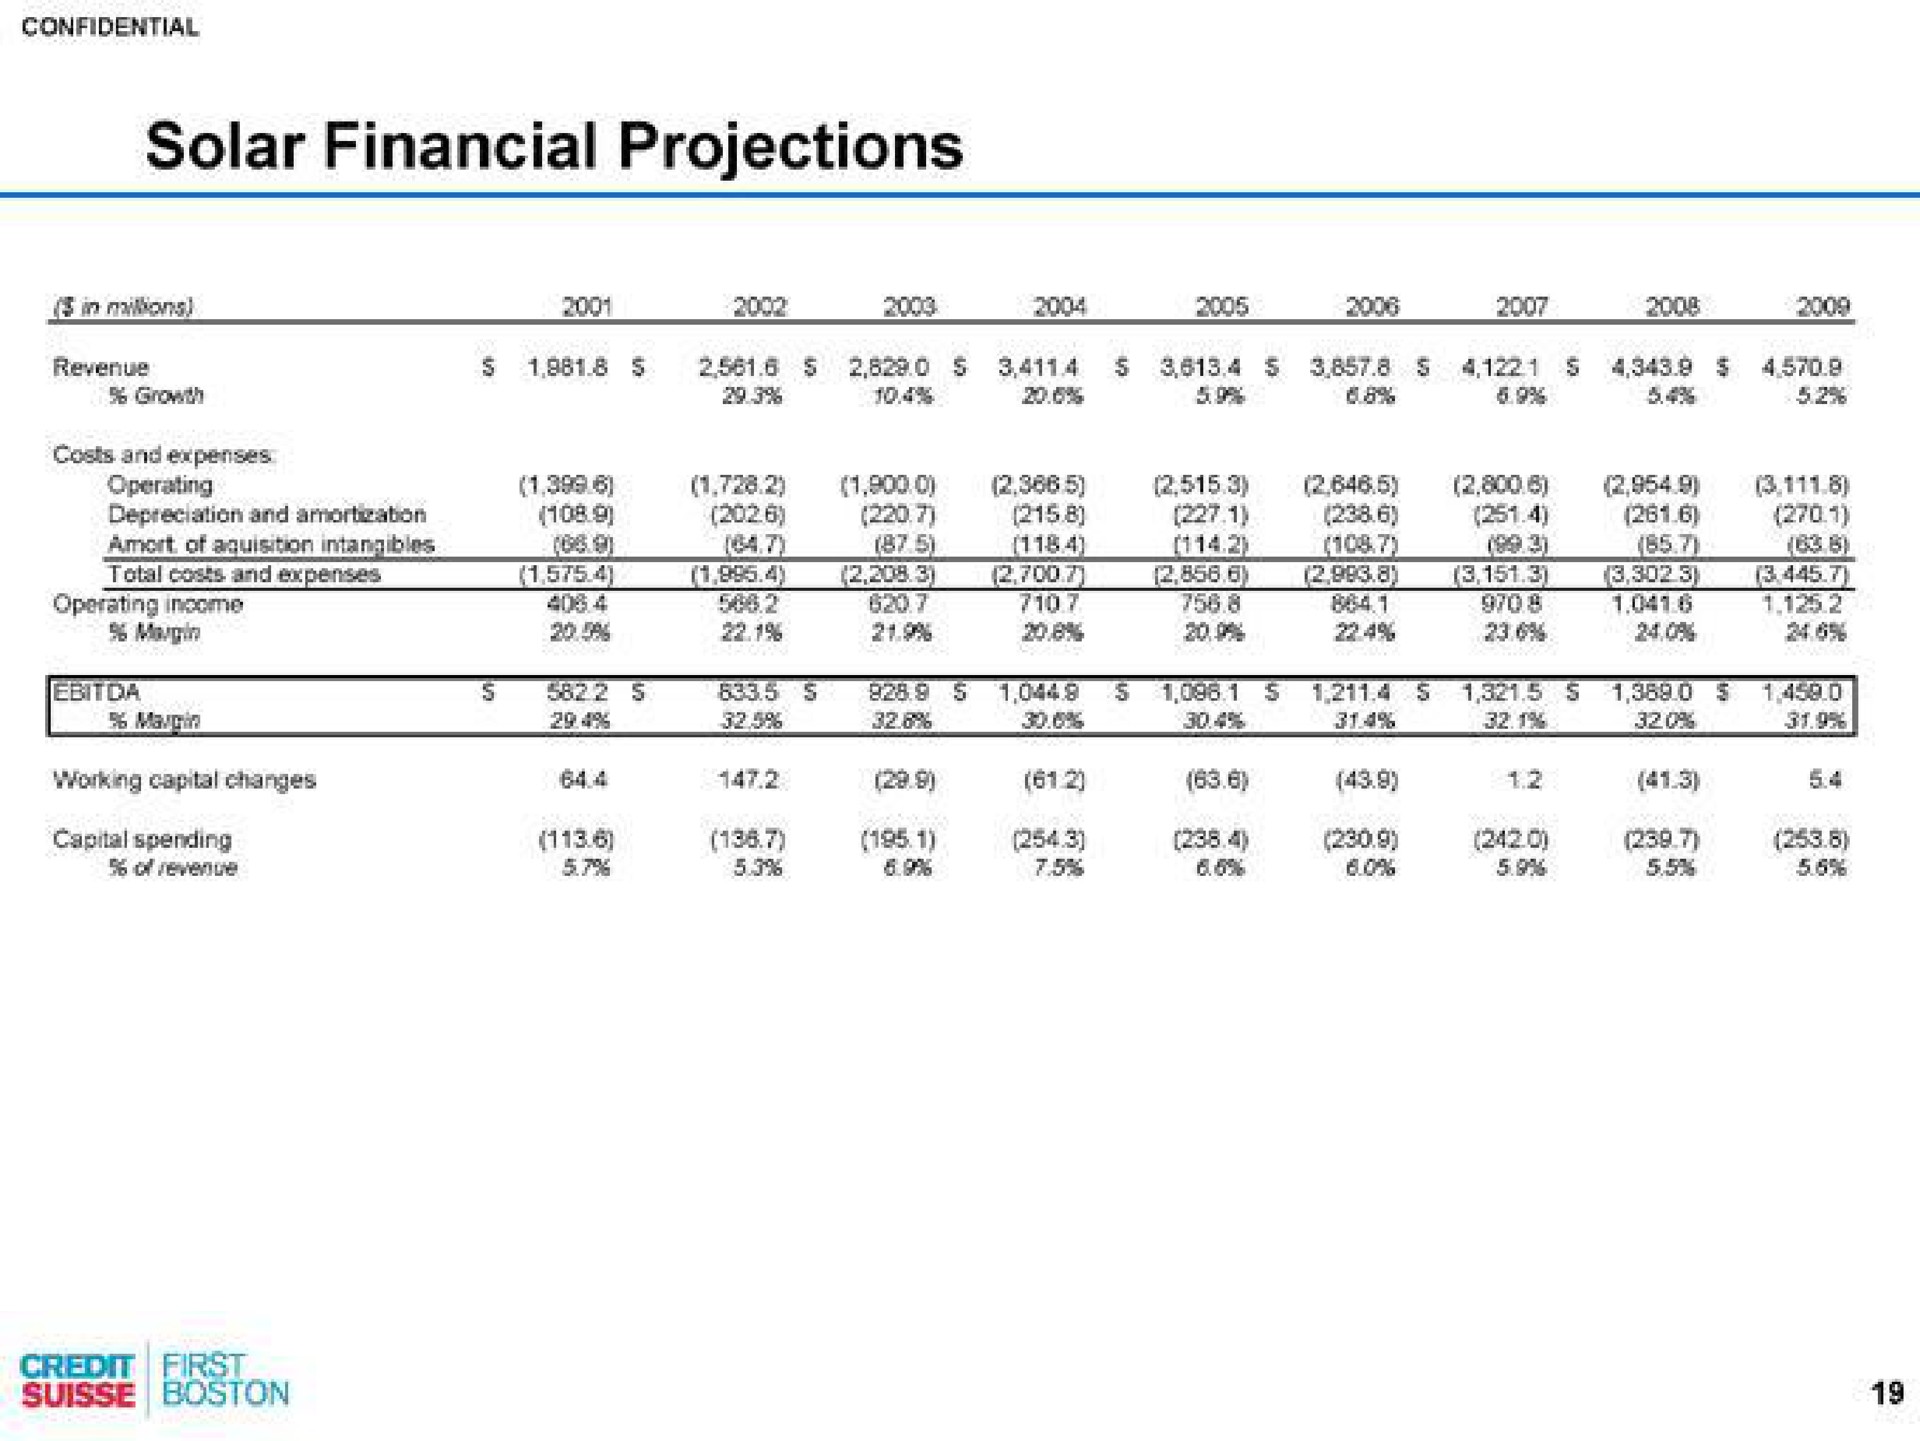 solar financial projections | Credit Suisse